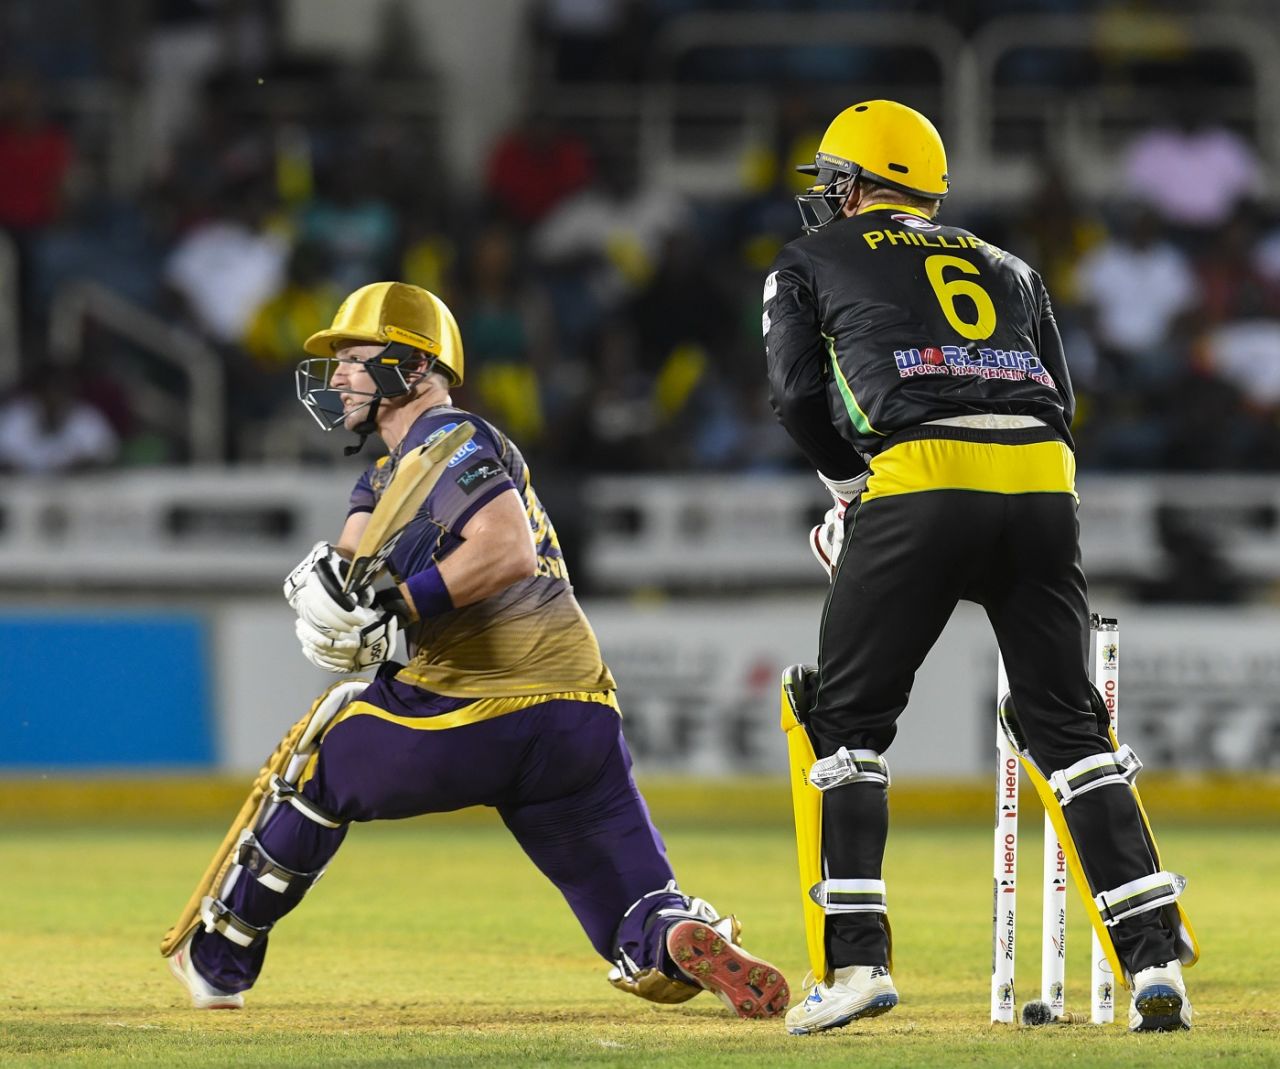 Colin Munro pulls out the switch hit, Jamaica Tallawahs v Trinbago Knight Riders, CPL 2019, Kingston, September 13, 2019